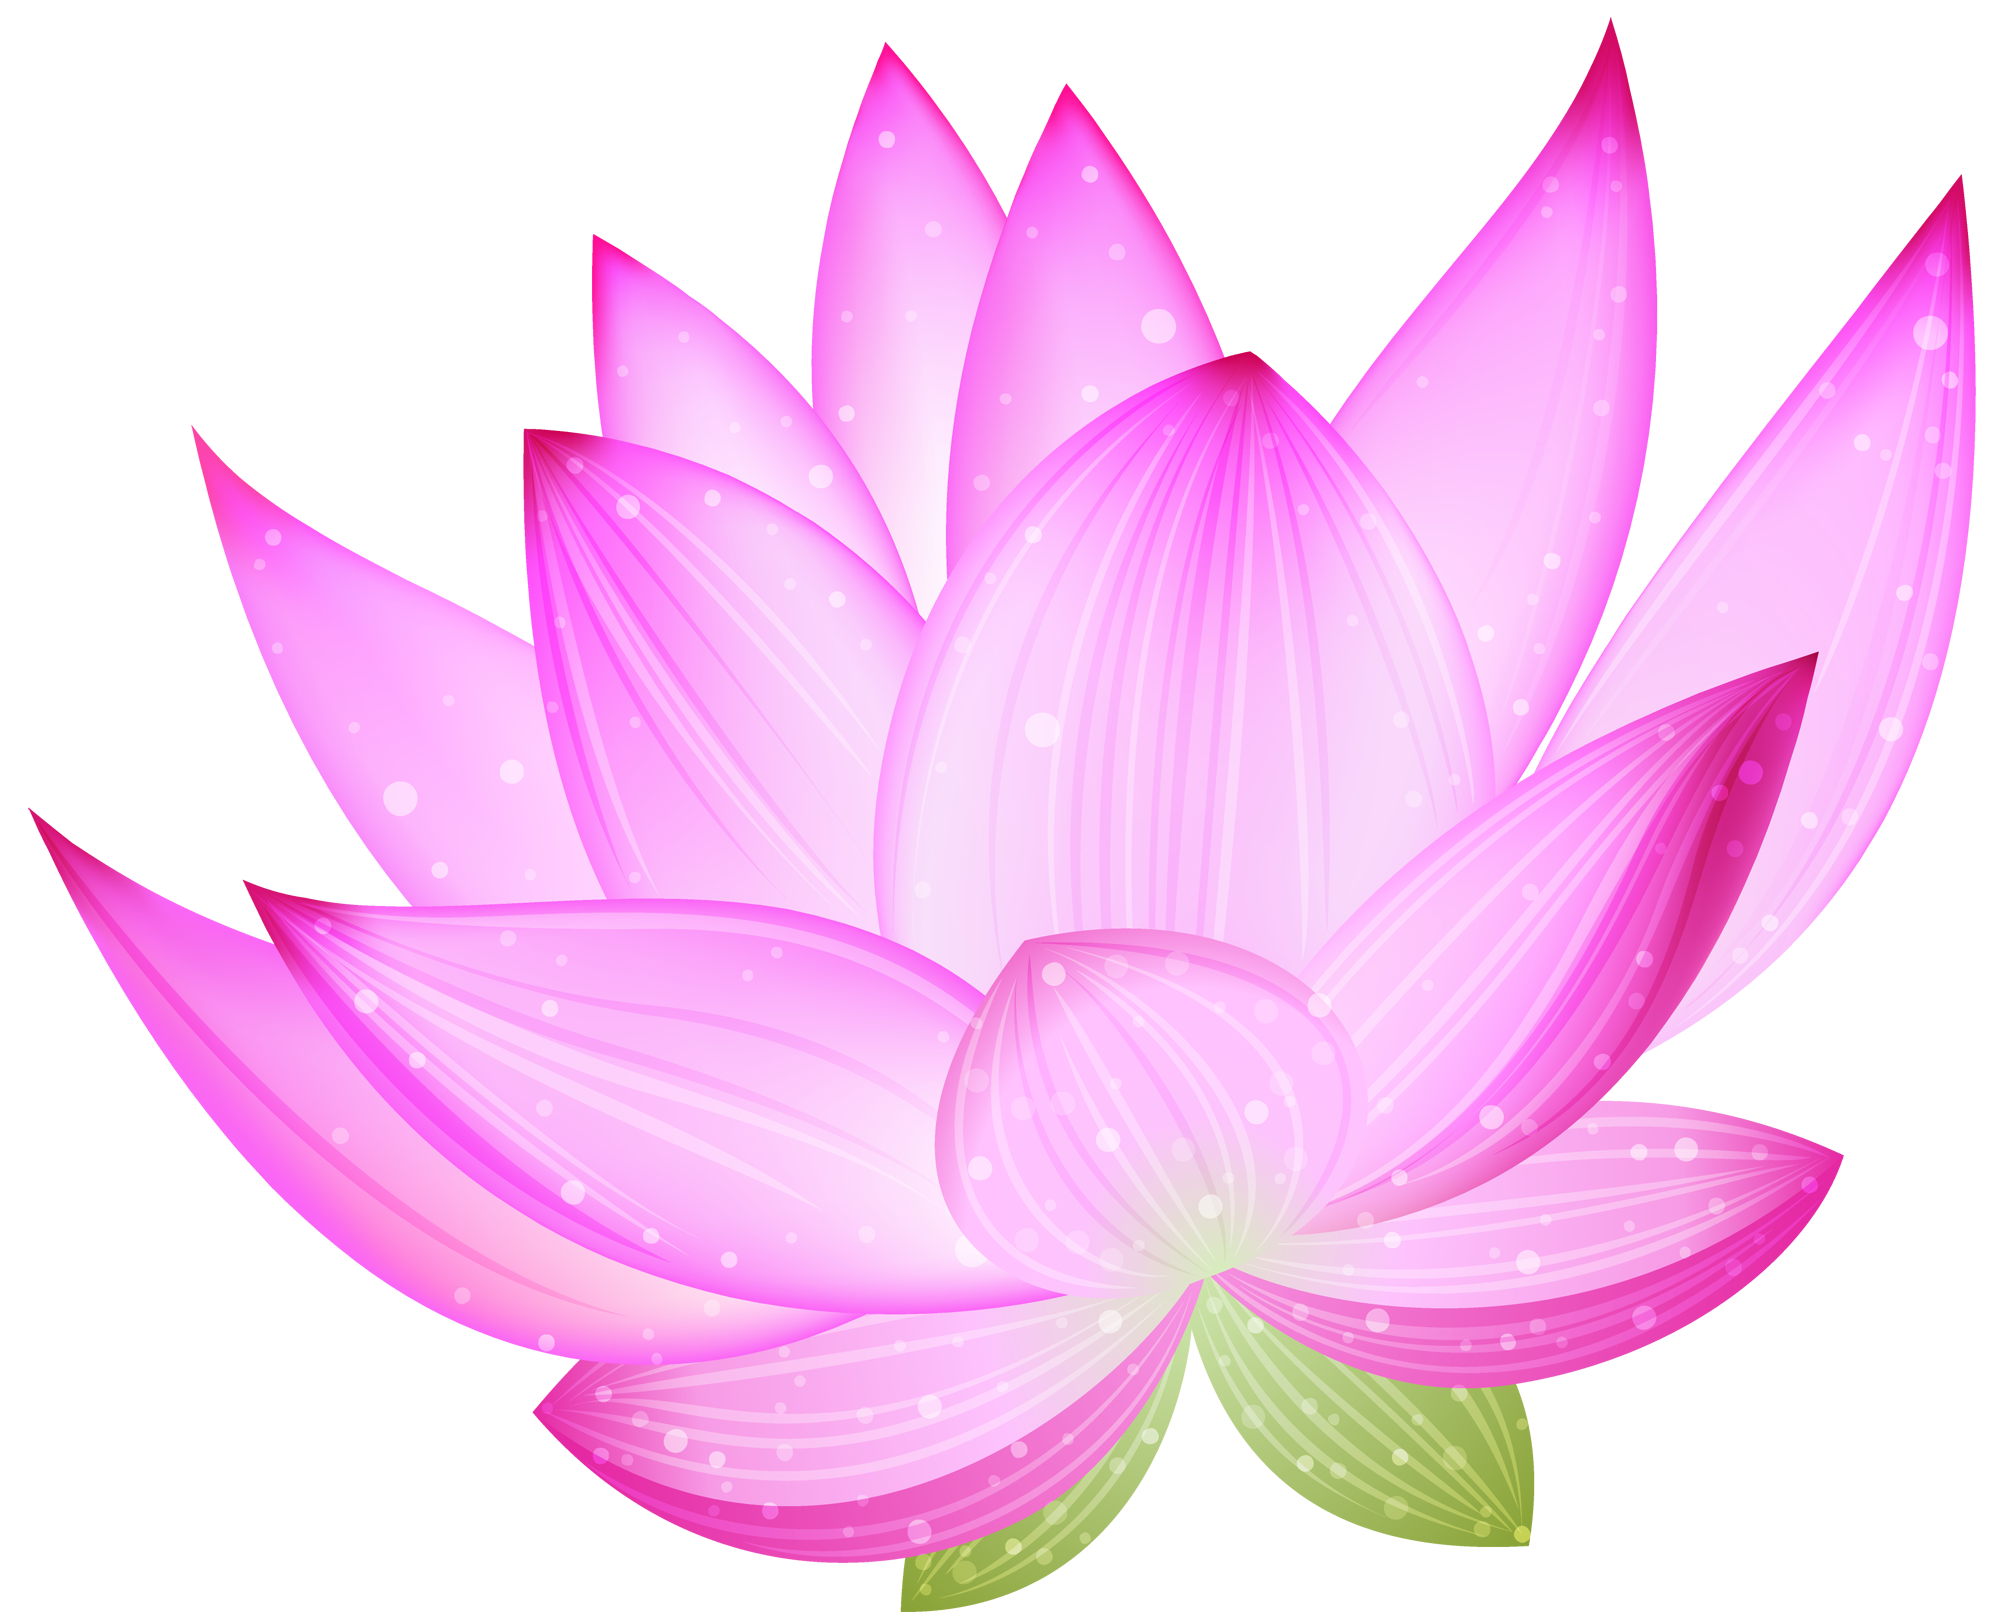 Free Lotus Flower Transparent Background, Download Free Lotus Flower  Transparent Background png images, Free ClipArts on Clipart Library